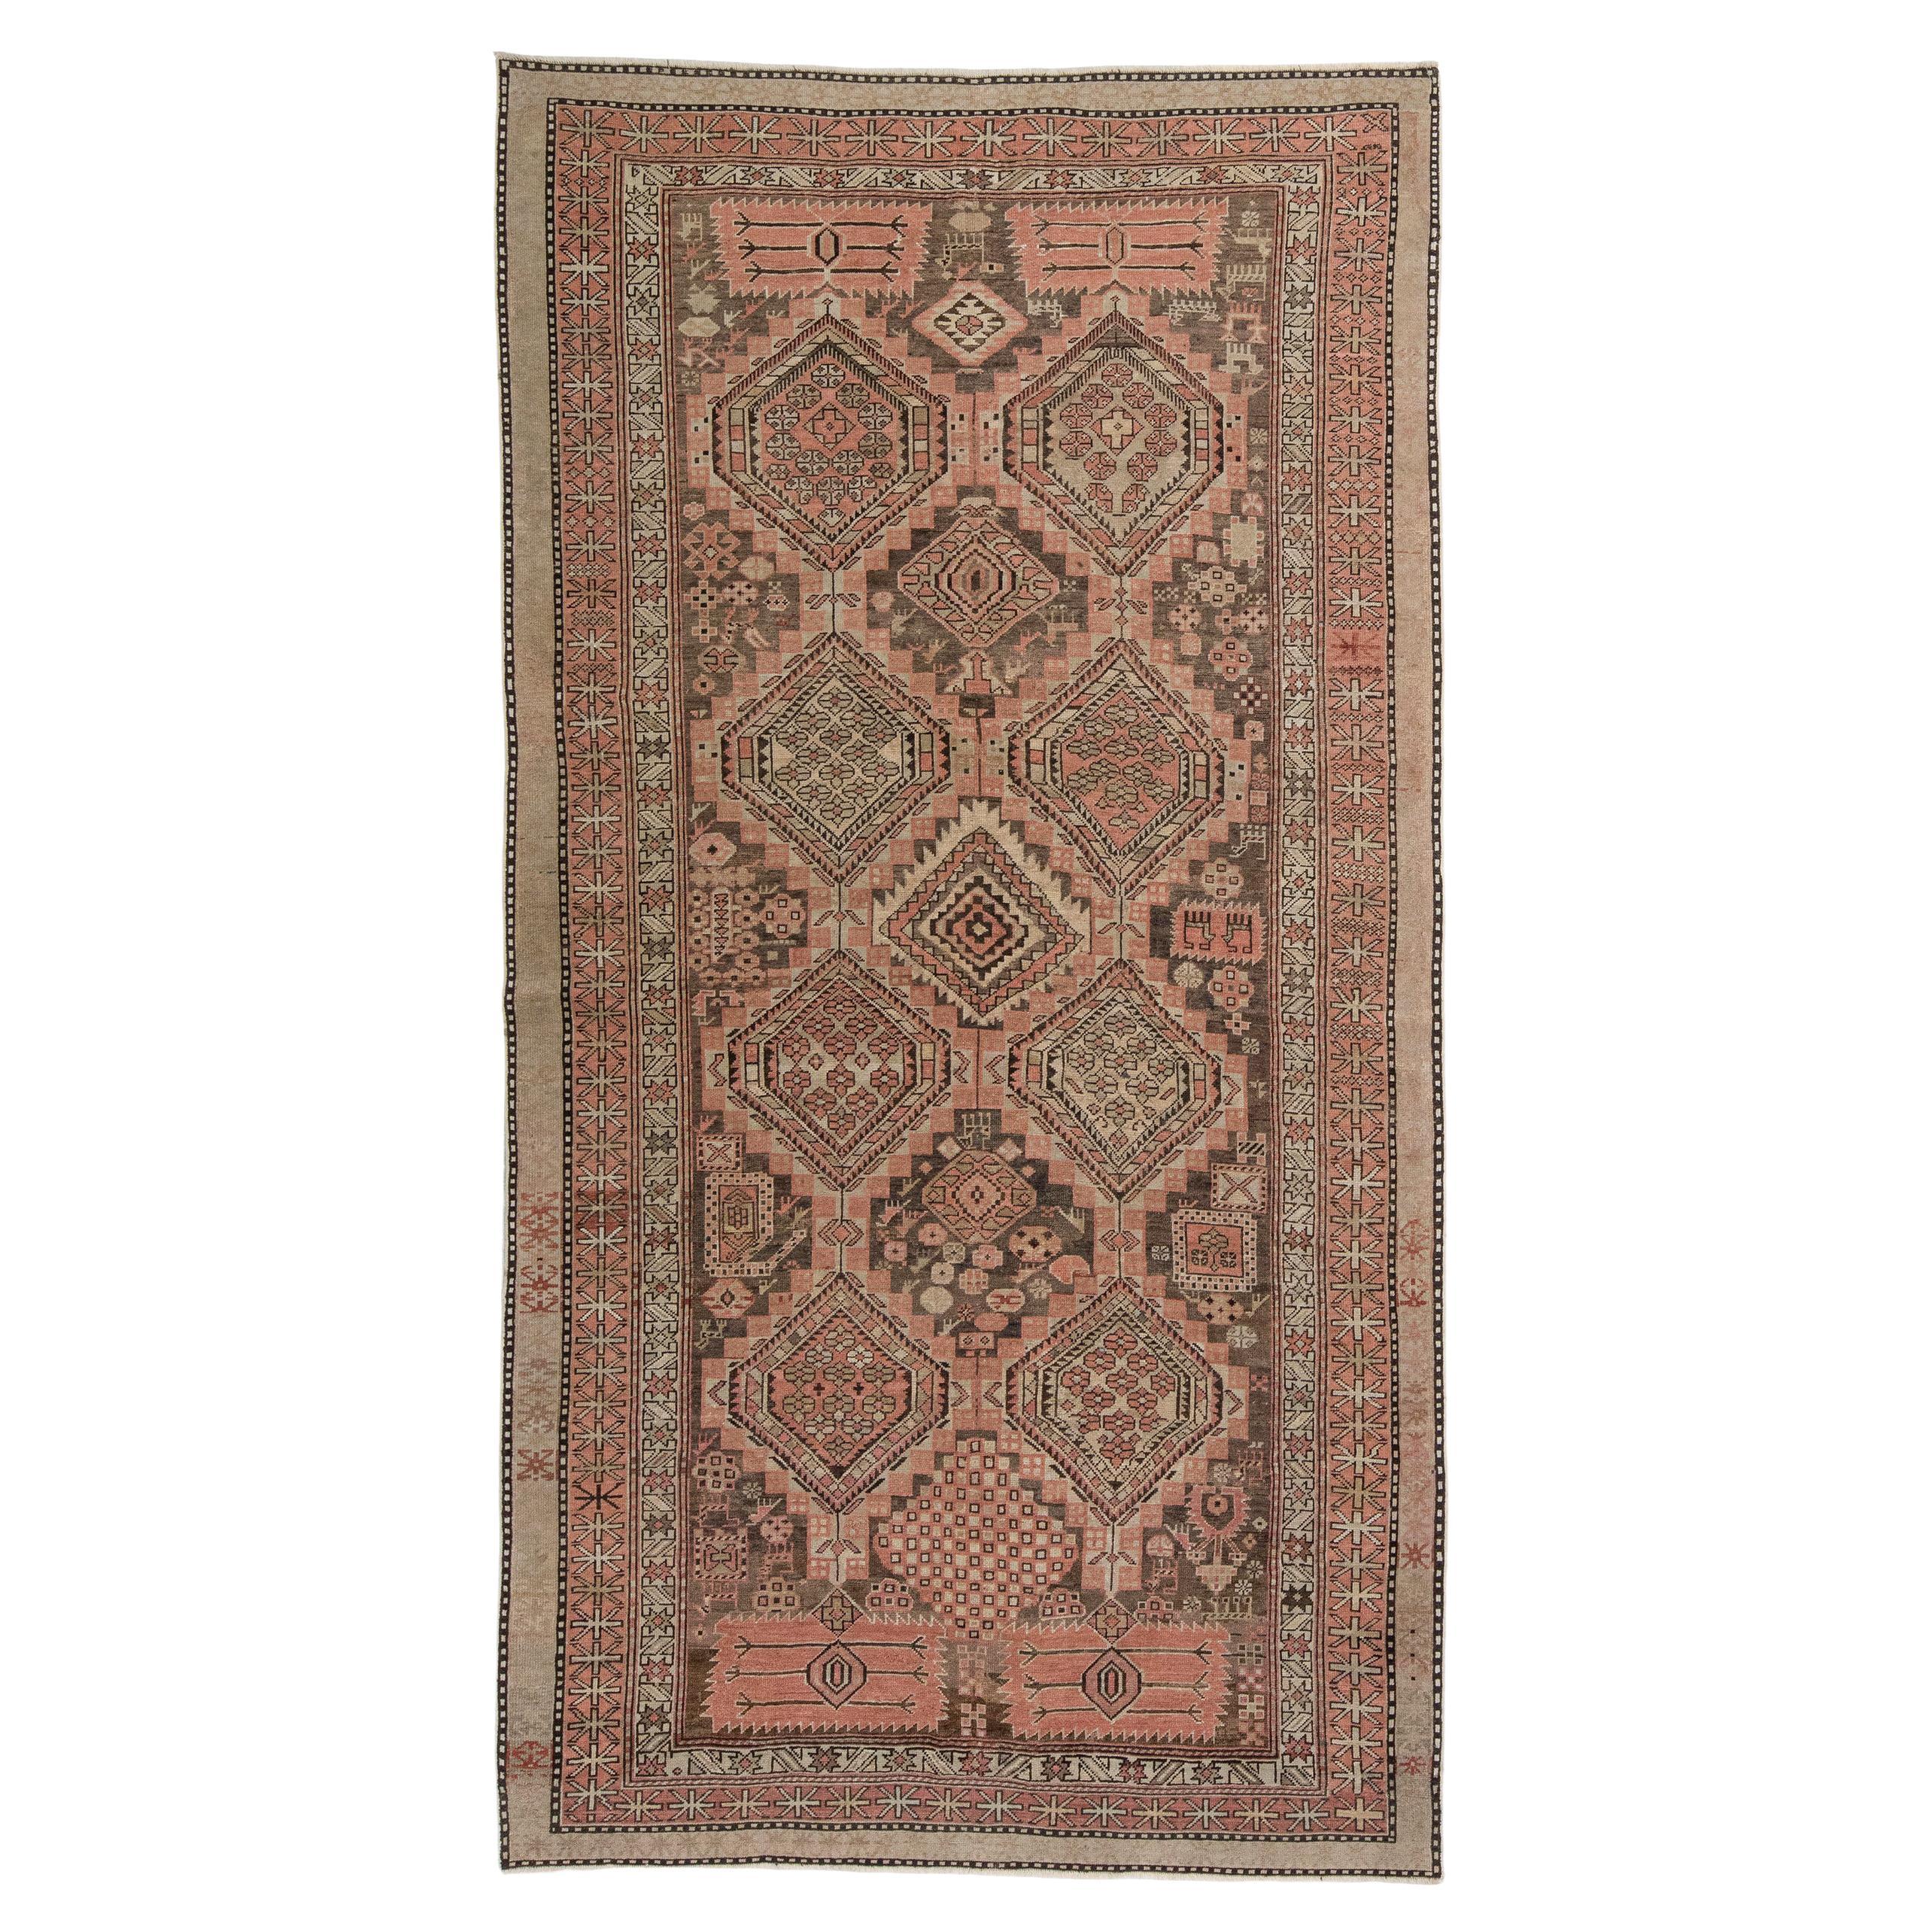 Antique Caucasian Shirvan Tribal Rug in Light Brown and Coral Rust Color